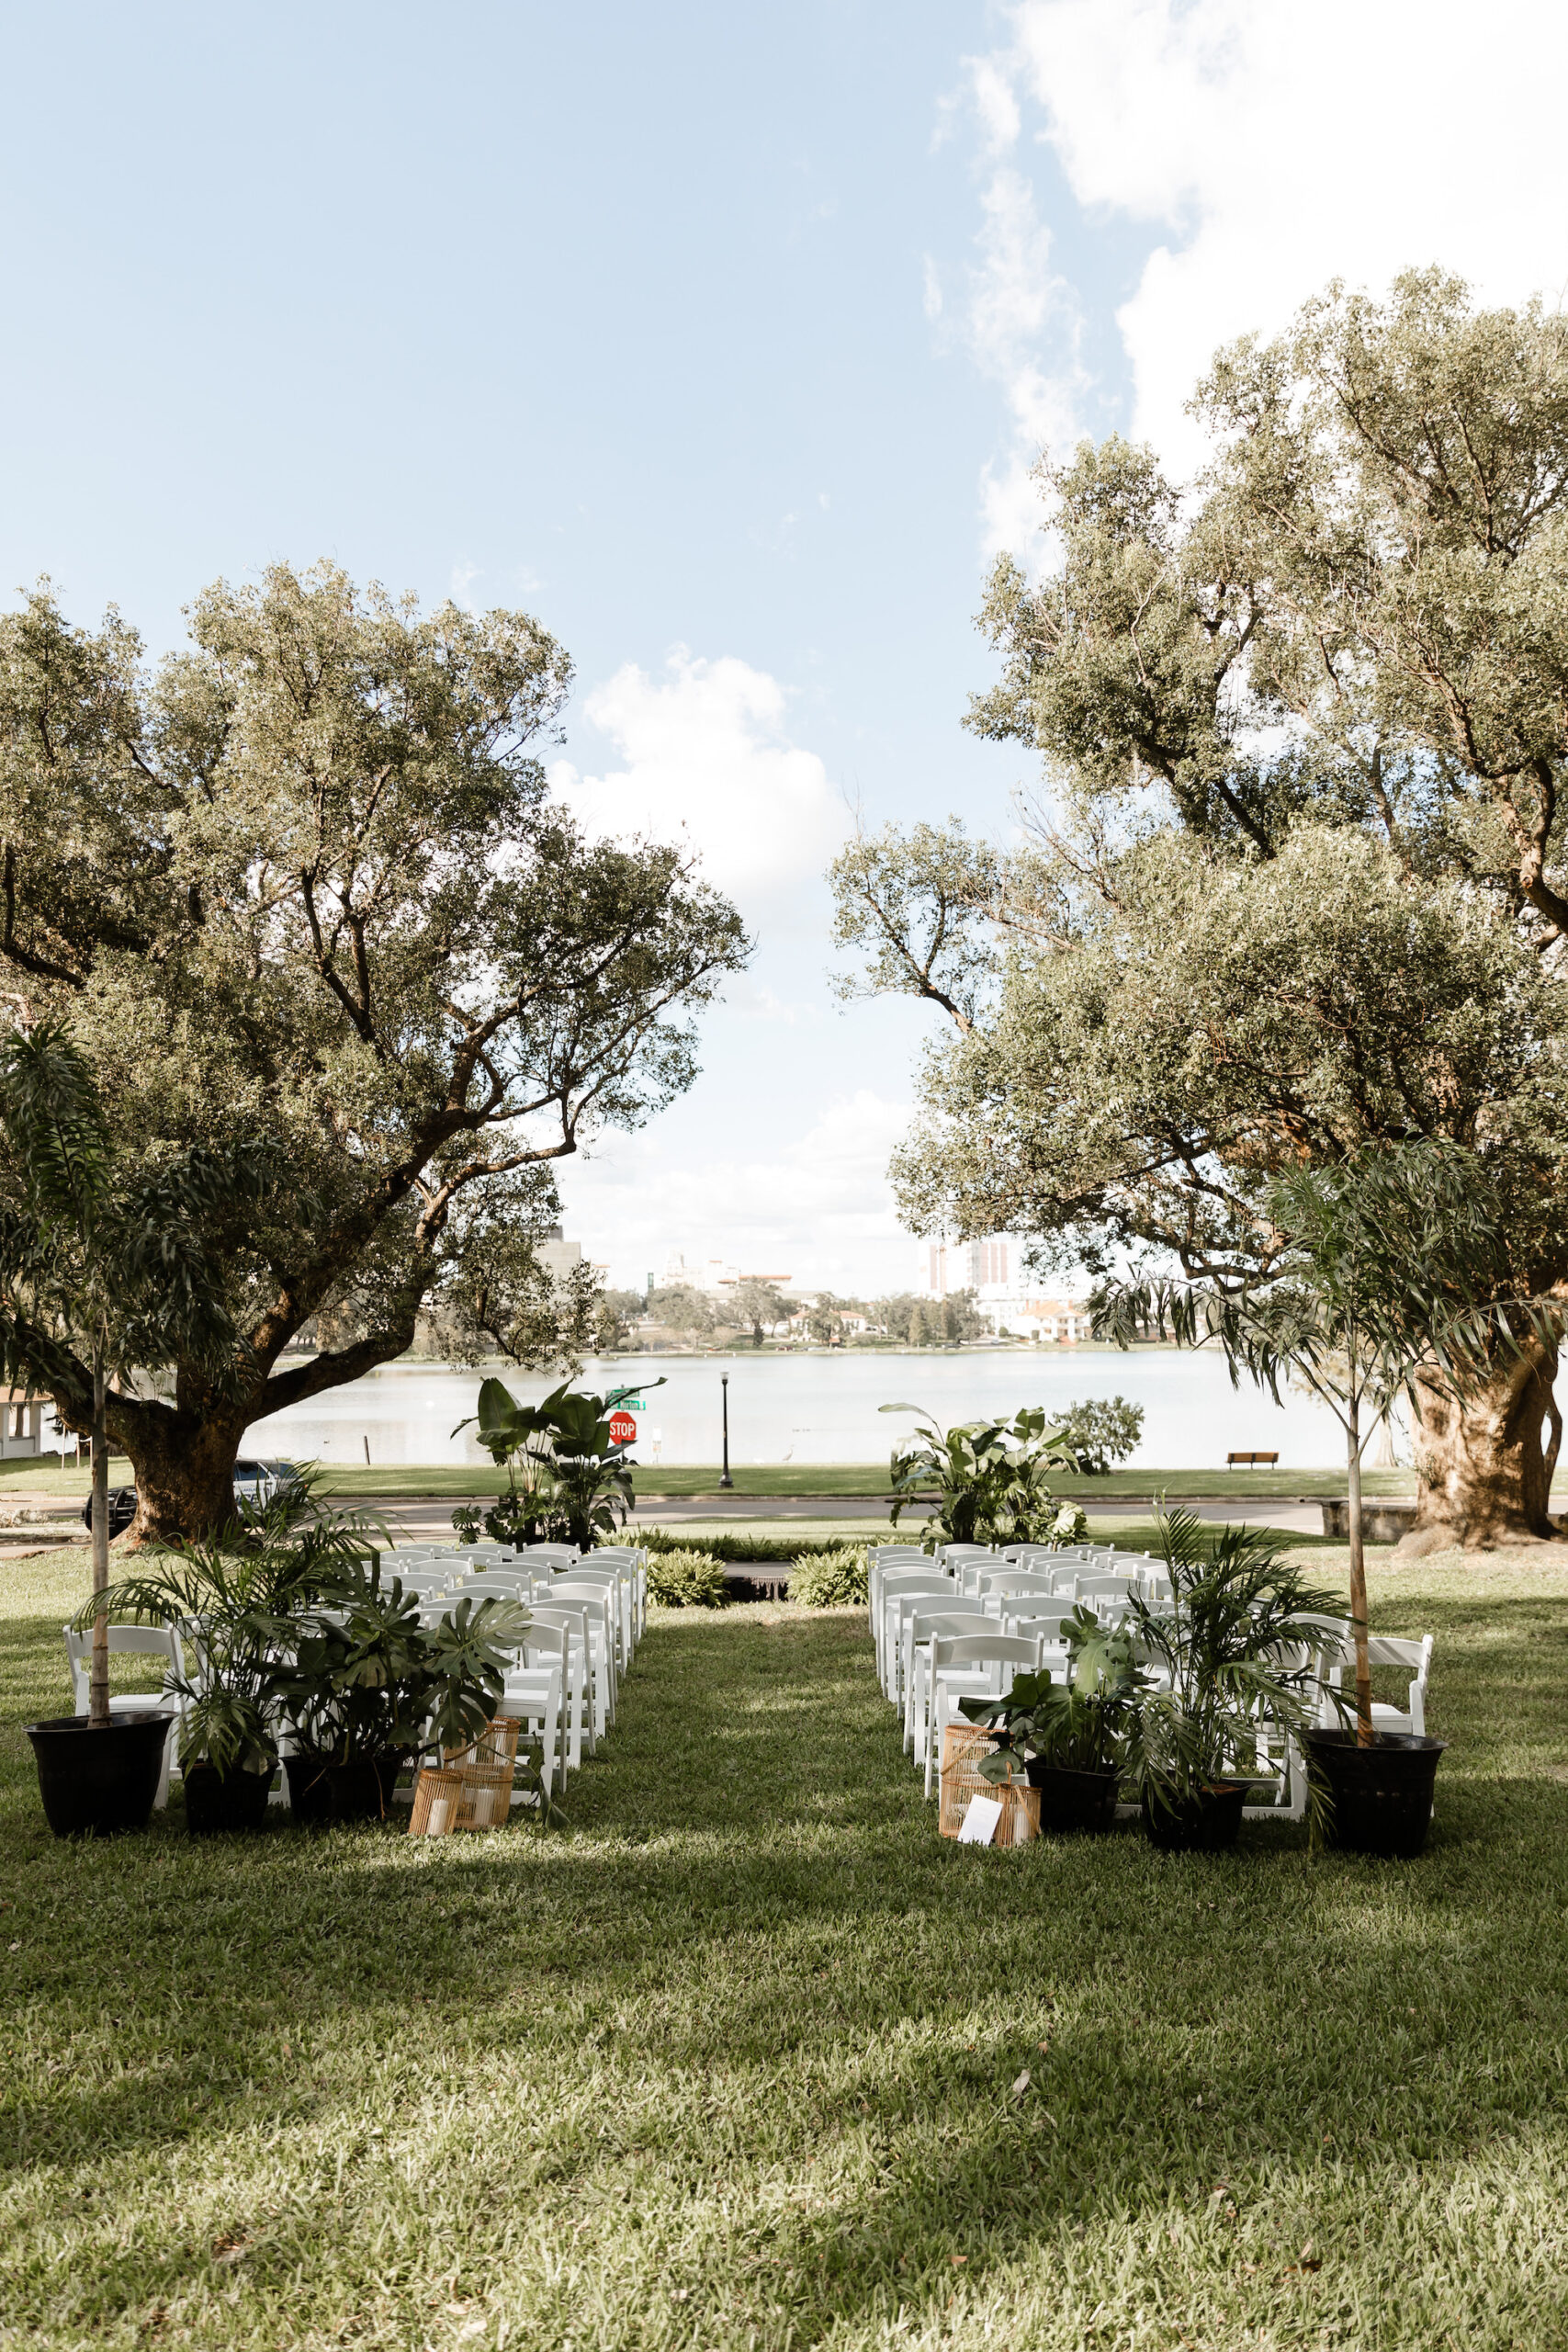 Lakeside Wedding Ceremony with White Garden Chairs | Lakeland Private Home